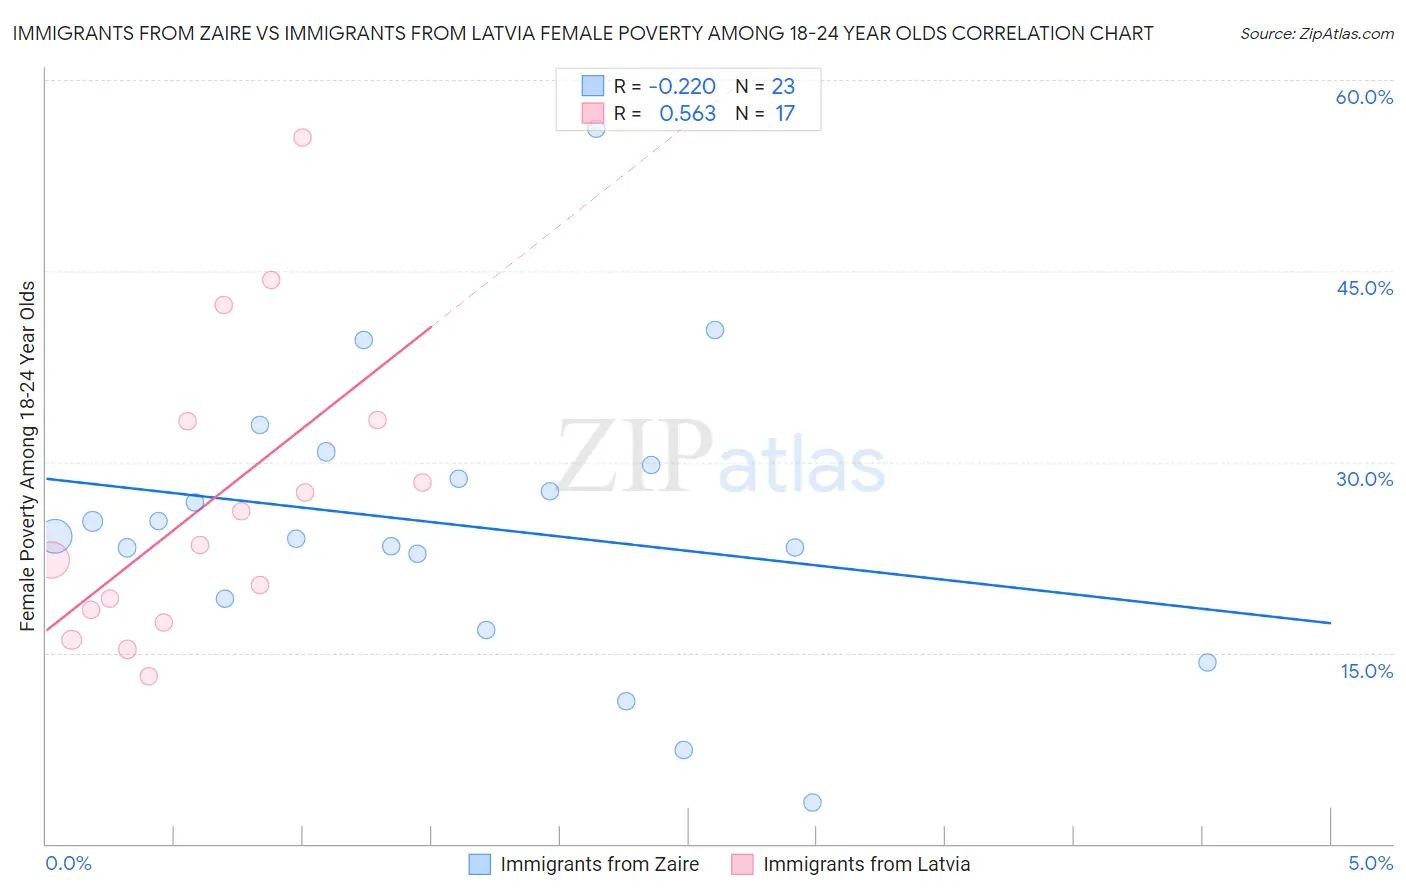 Immigrants from Zaire vs Immigrants from Latvia Female Poverty Among 18-24 Year Olds